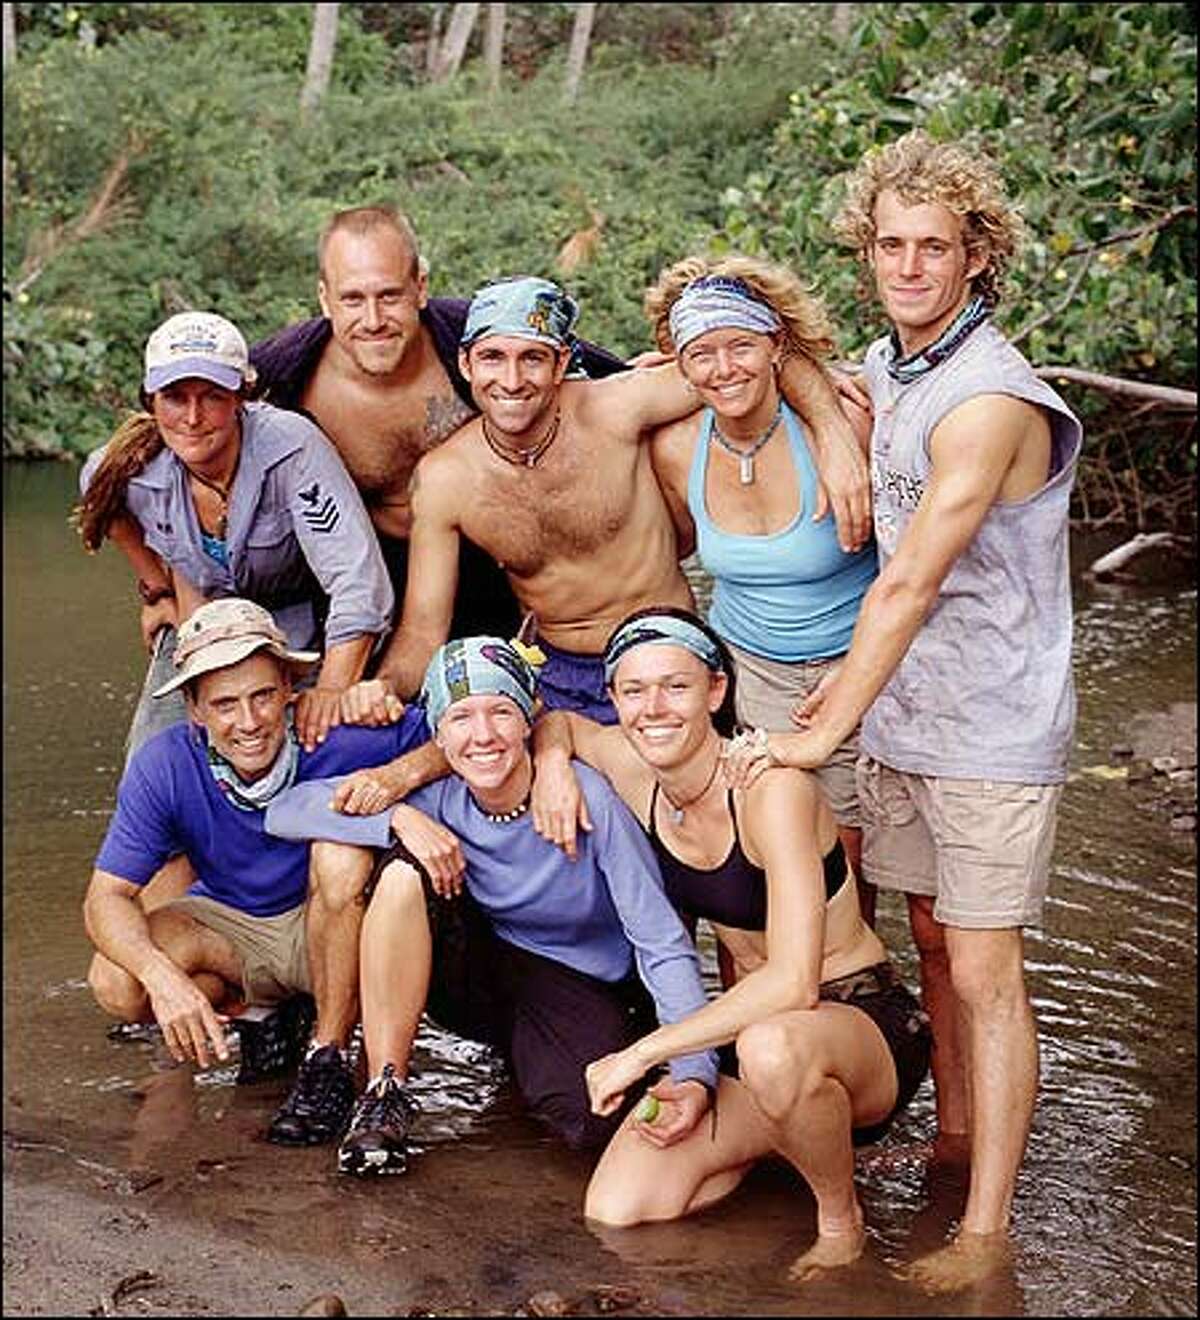 The Rotu tribe. Front row, from left, Paschal English, Neleh Dennis and Tammy Leitner. Standing, from left: Zoe Zanidakis, Robert De Canio, John Carroll, Kathy Vavrick-O'Brien and Gabriel Cade.